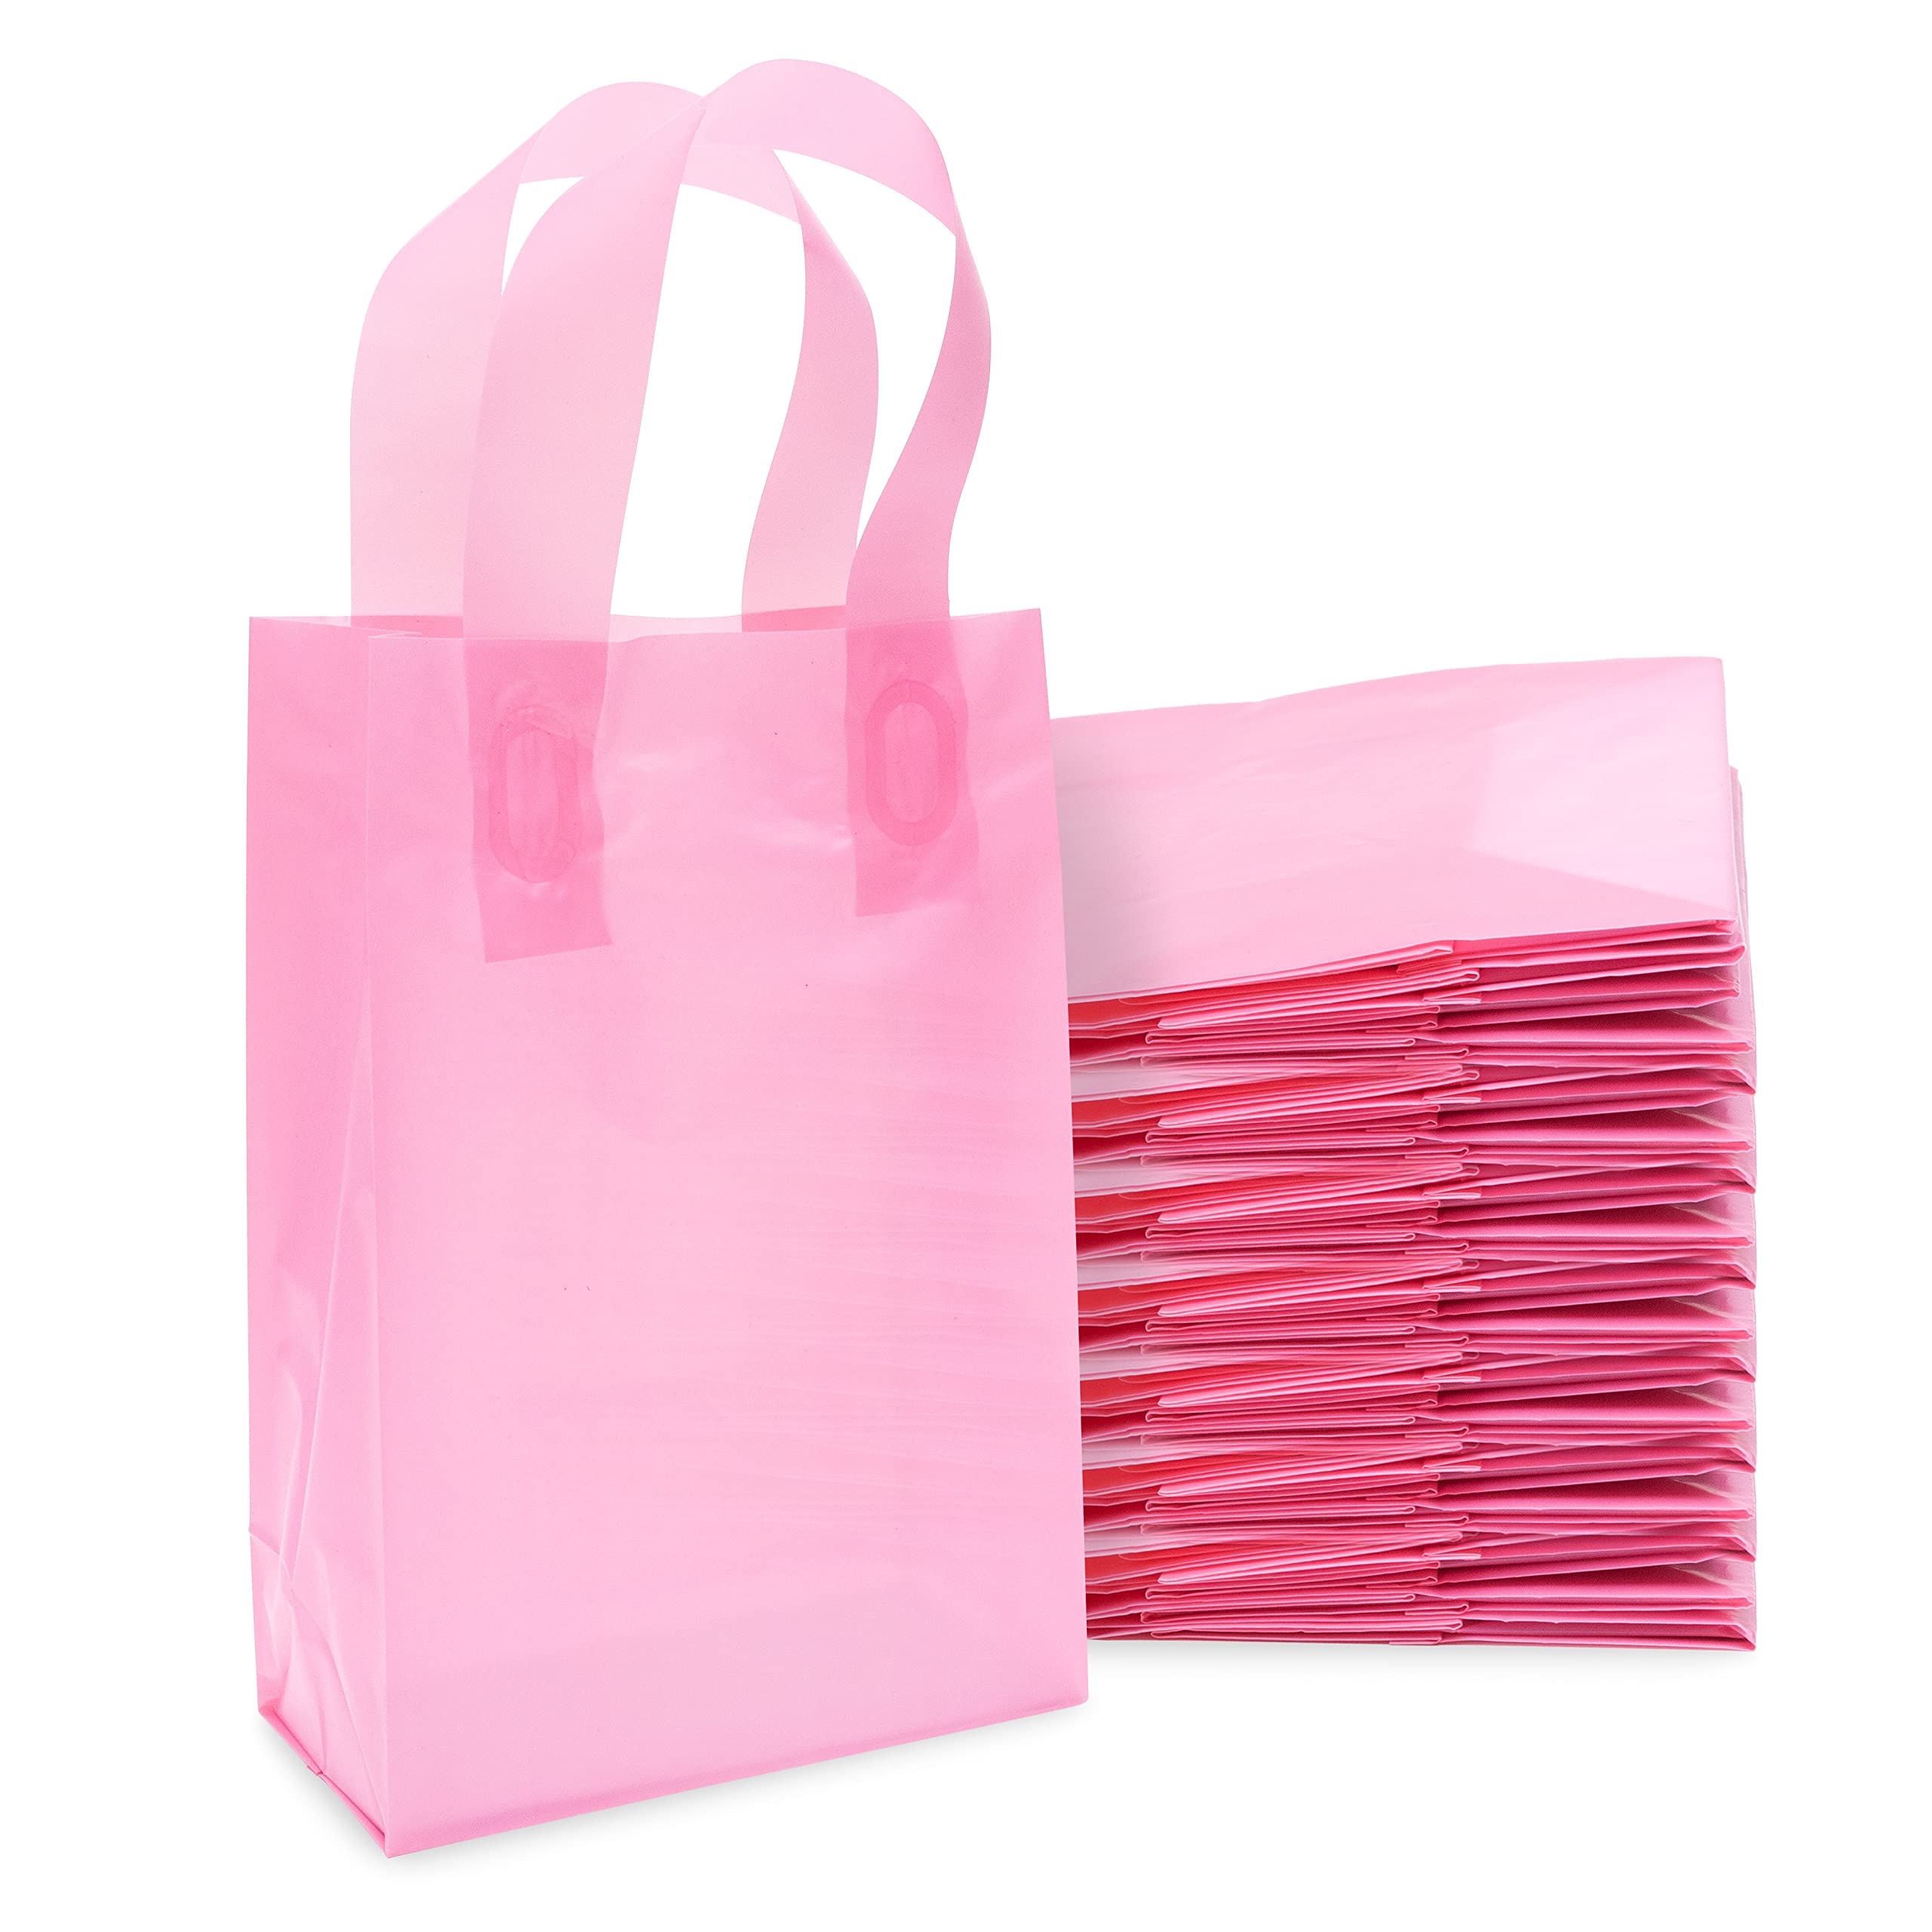 Prime Line Packaging 6x3x9 100 Pack Pink Gift Bags with Handles, Pink Goodie Bags for Small Business, Retail, Boutique, Merchandise, Bulk  - Like New